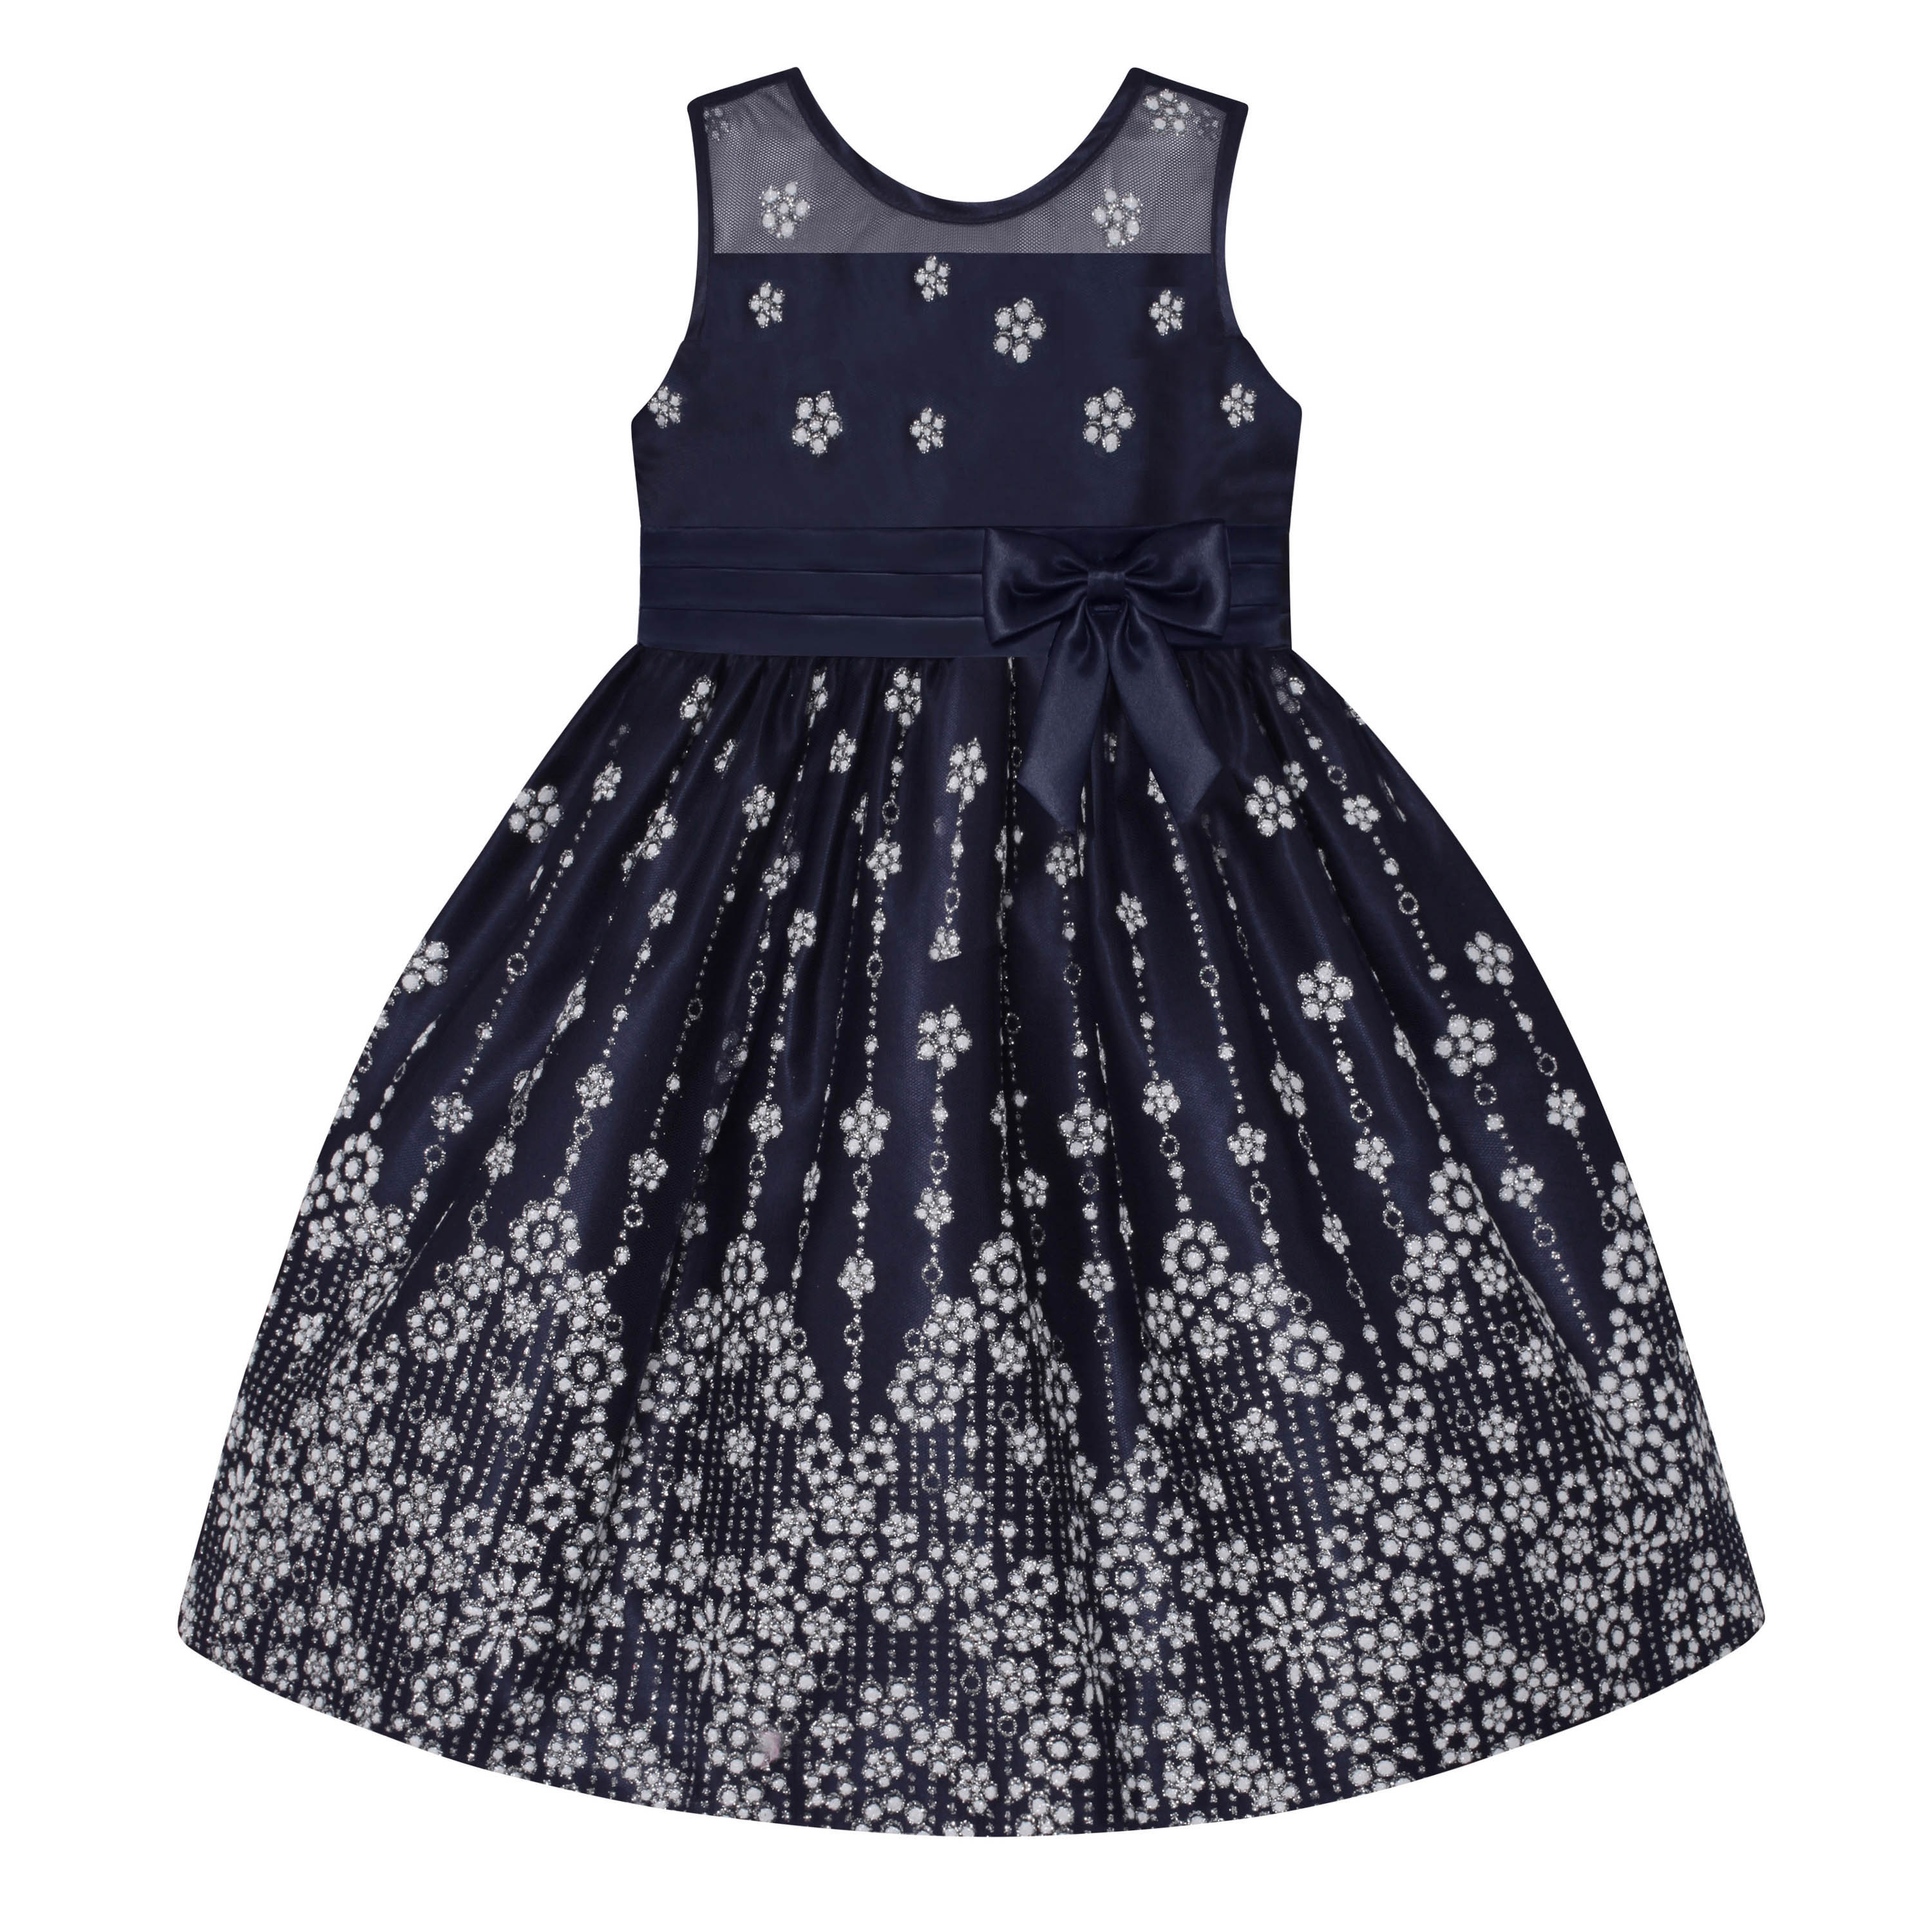 Love Girls' Illusion Party Dress - Floral